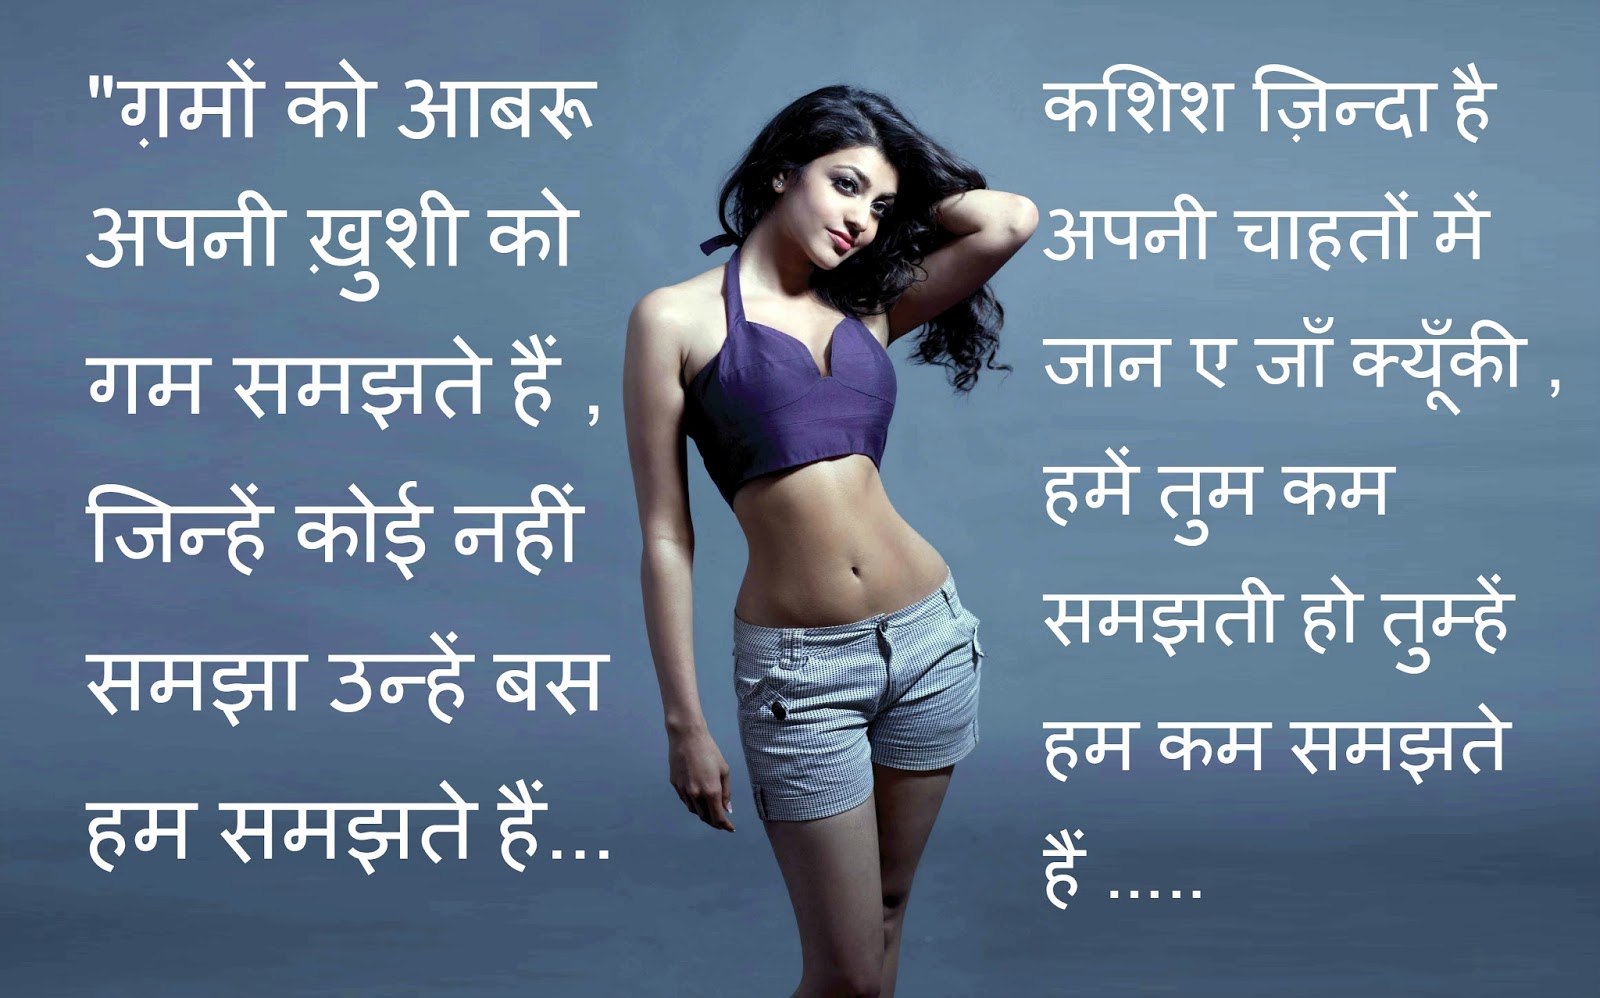 Cute Love Sms for Her in Hindi with image